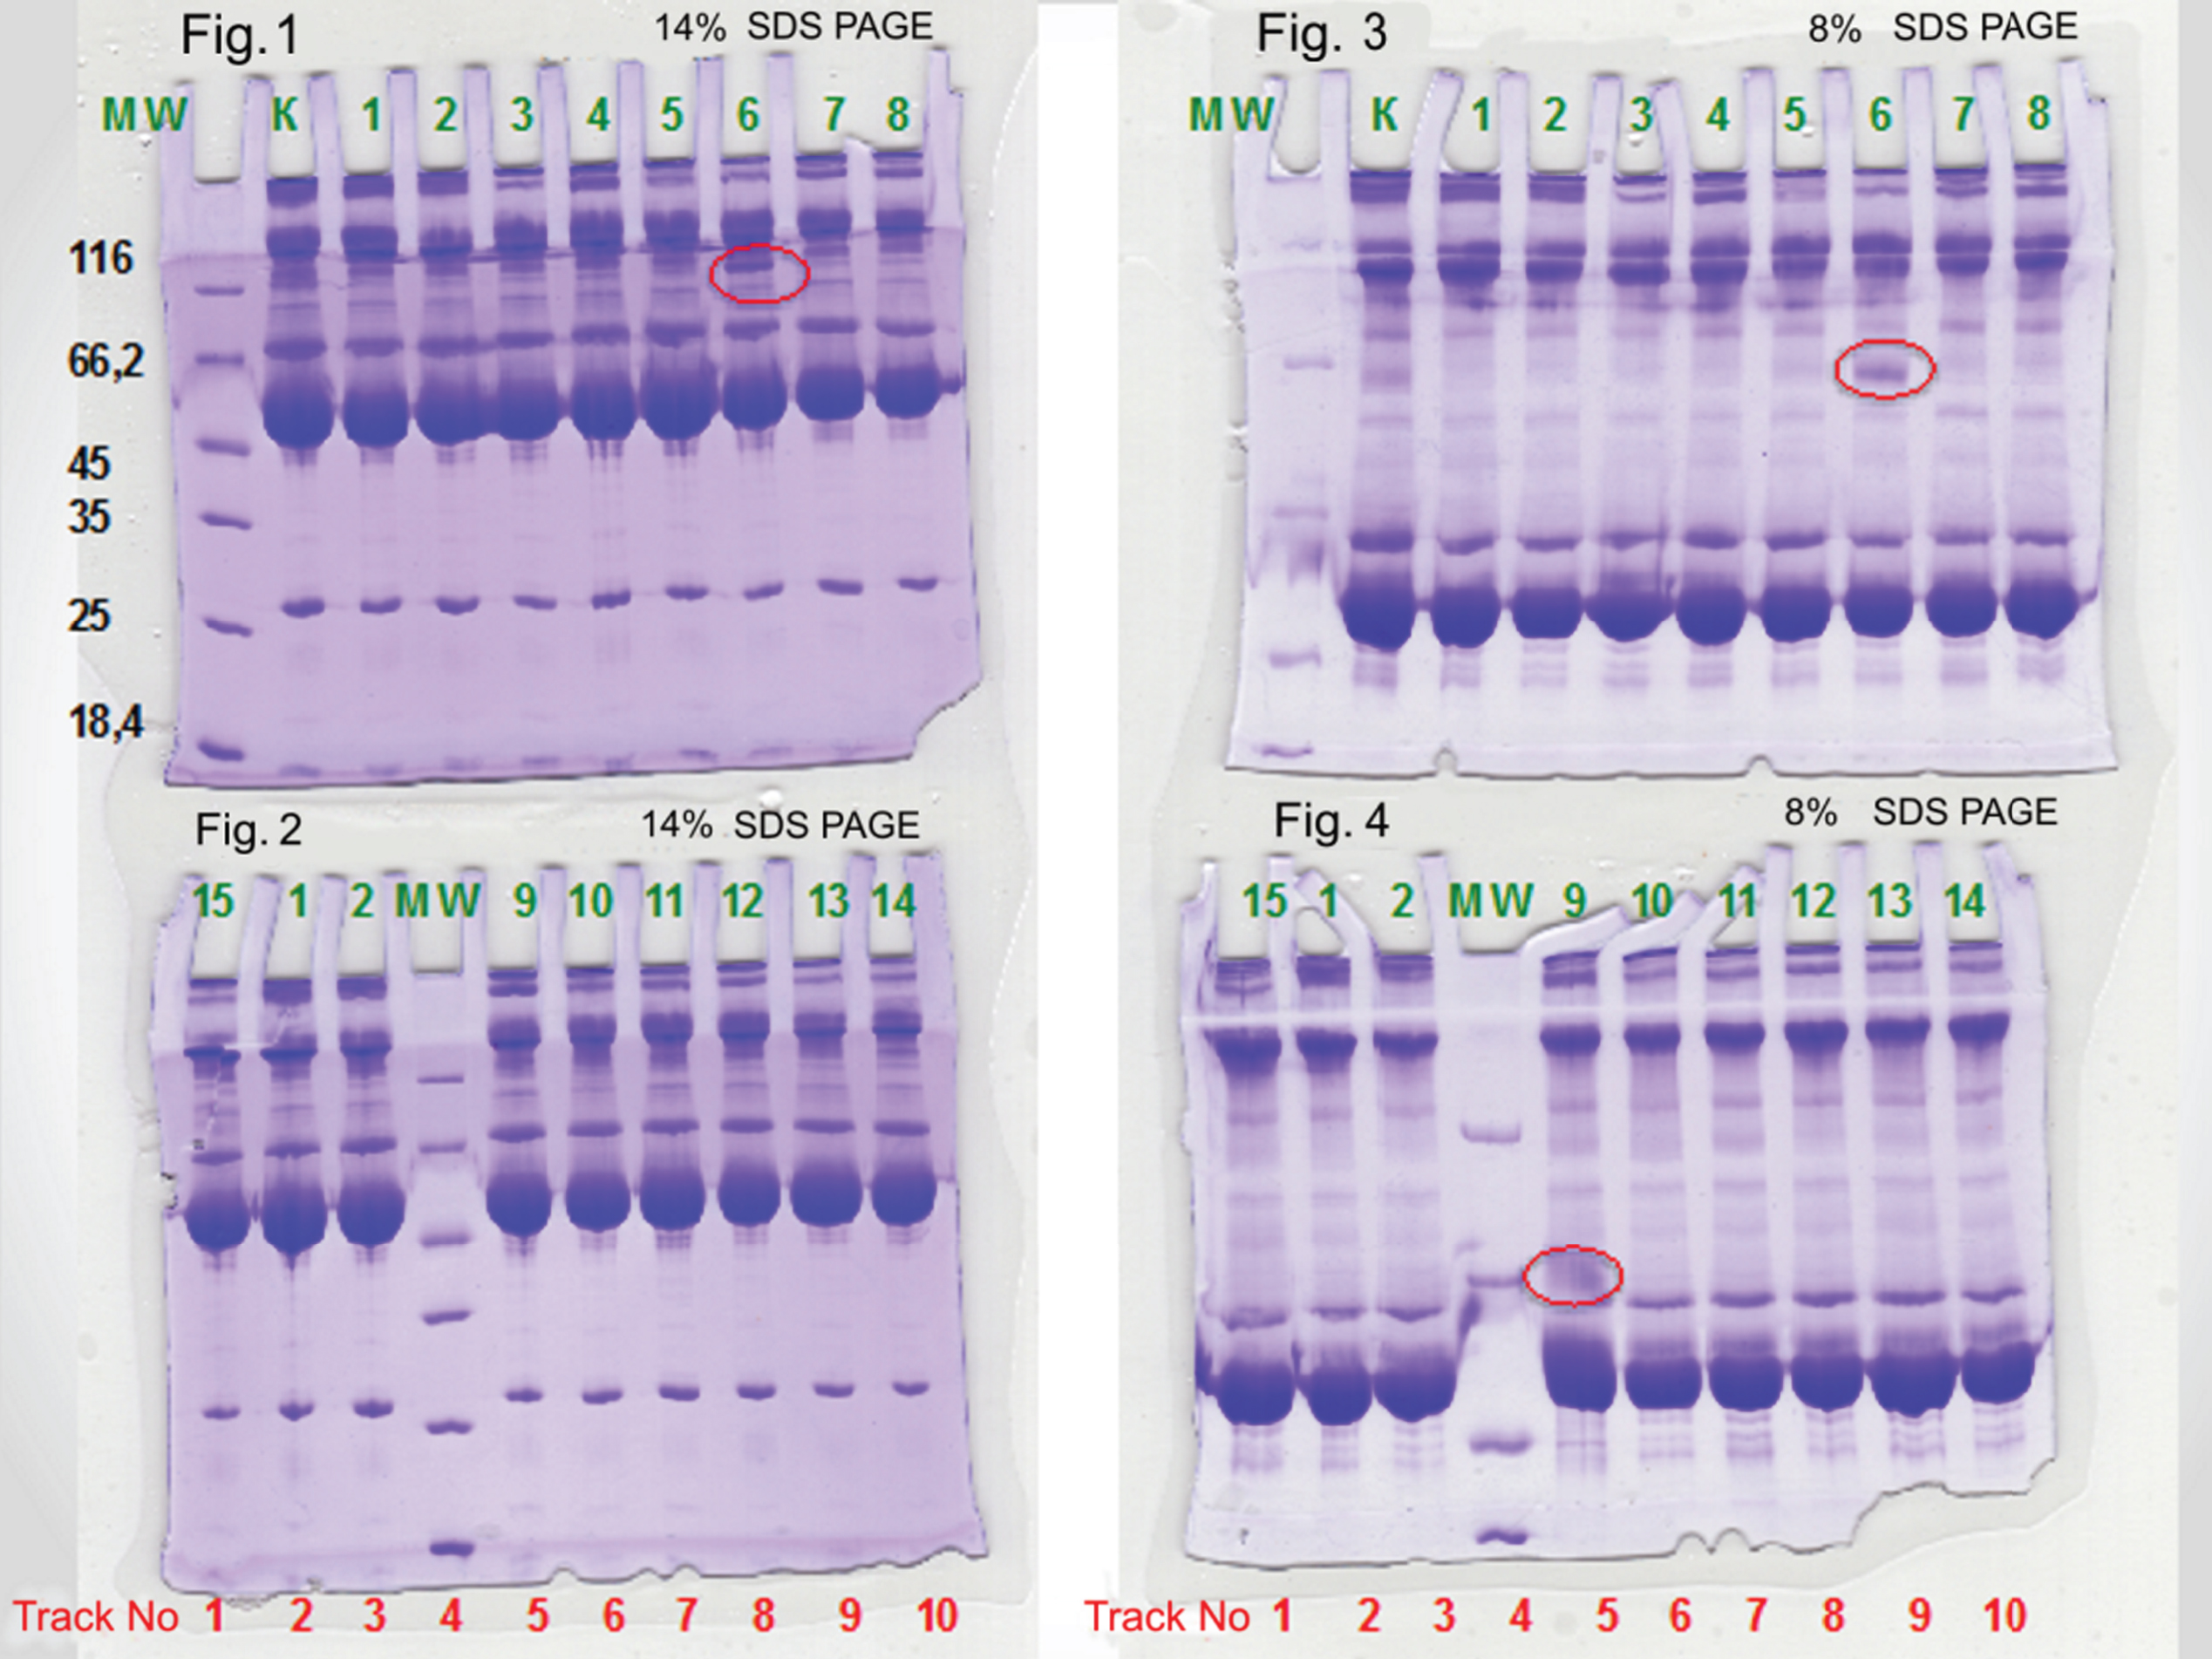 1-D electrophoresis of plasma of 14% and 8% SDS PAGE. Figures 1 and 2 Individual plasma samples 14% SDS PAGE. Figures 1 and 2 1-D-electrophoretogram plasma proteins. 1st track - proteins - markers MW. 2nd track - control pools of blood plasma. 3rd track - a clinically healthy subject 1. 4th track - a clinically healthy subject 2. 5th track - patient 3. 6th track - patient 4. 7th track - patient 5. 8th track - patient 6. 9th track - patient 7. 10th track - patient 8. Figures 3 and 4 Individual plasma samples 8% SDS PAGE. Figures 3 and 4 1-D electrophoretogram plasma proteins of the blood of D2TM patients of the blood of D2TM patients. 1st track - control pools of blood plasma. 2nd track - a clinically healthy subject 1. 3rd track - a clinically healthy subject 2. 4th track - markers MW. 5th track - patient 9. 6th track - patient 10. 7th track – patient 11. 8th track – patients 12. 9th track - patients 13. 10th track - patients 14.